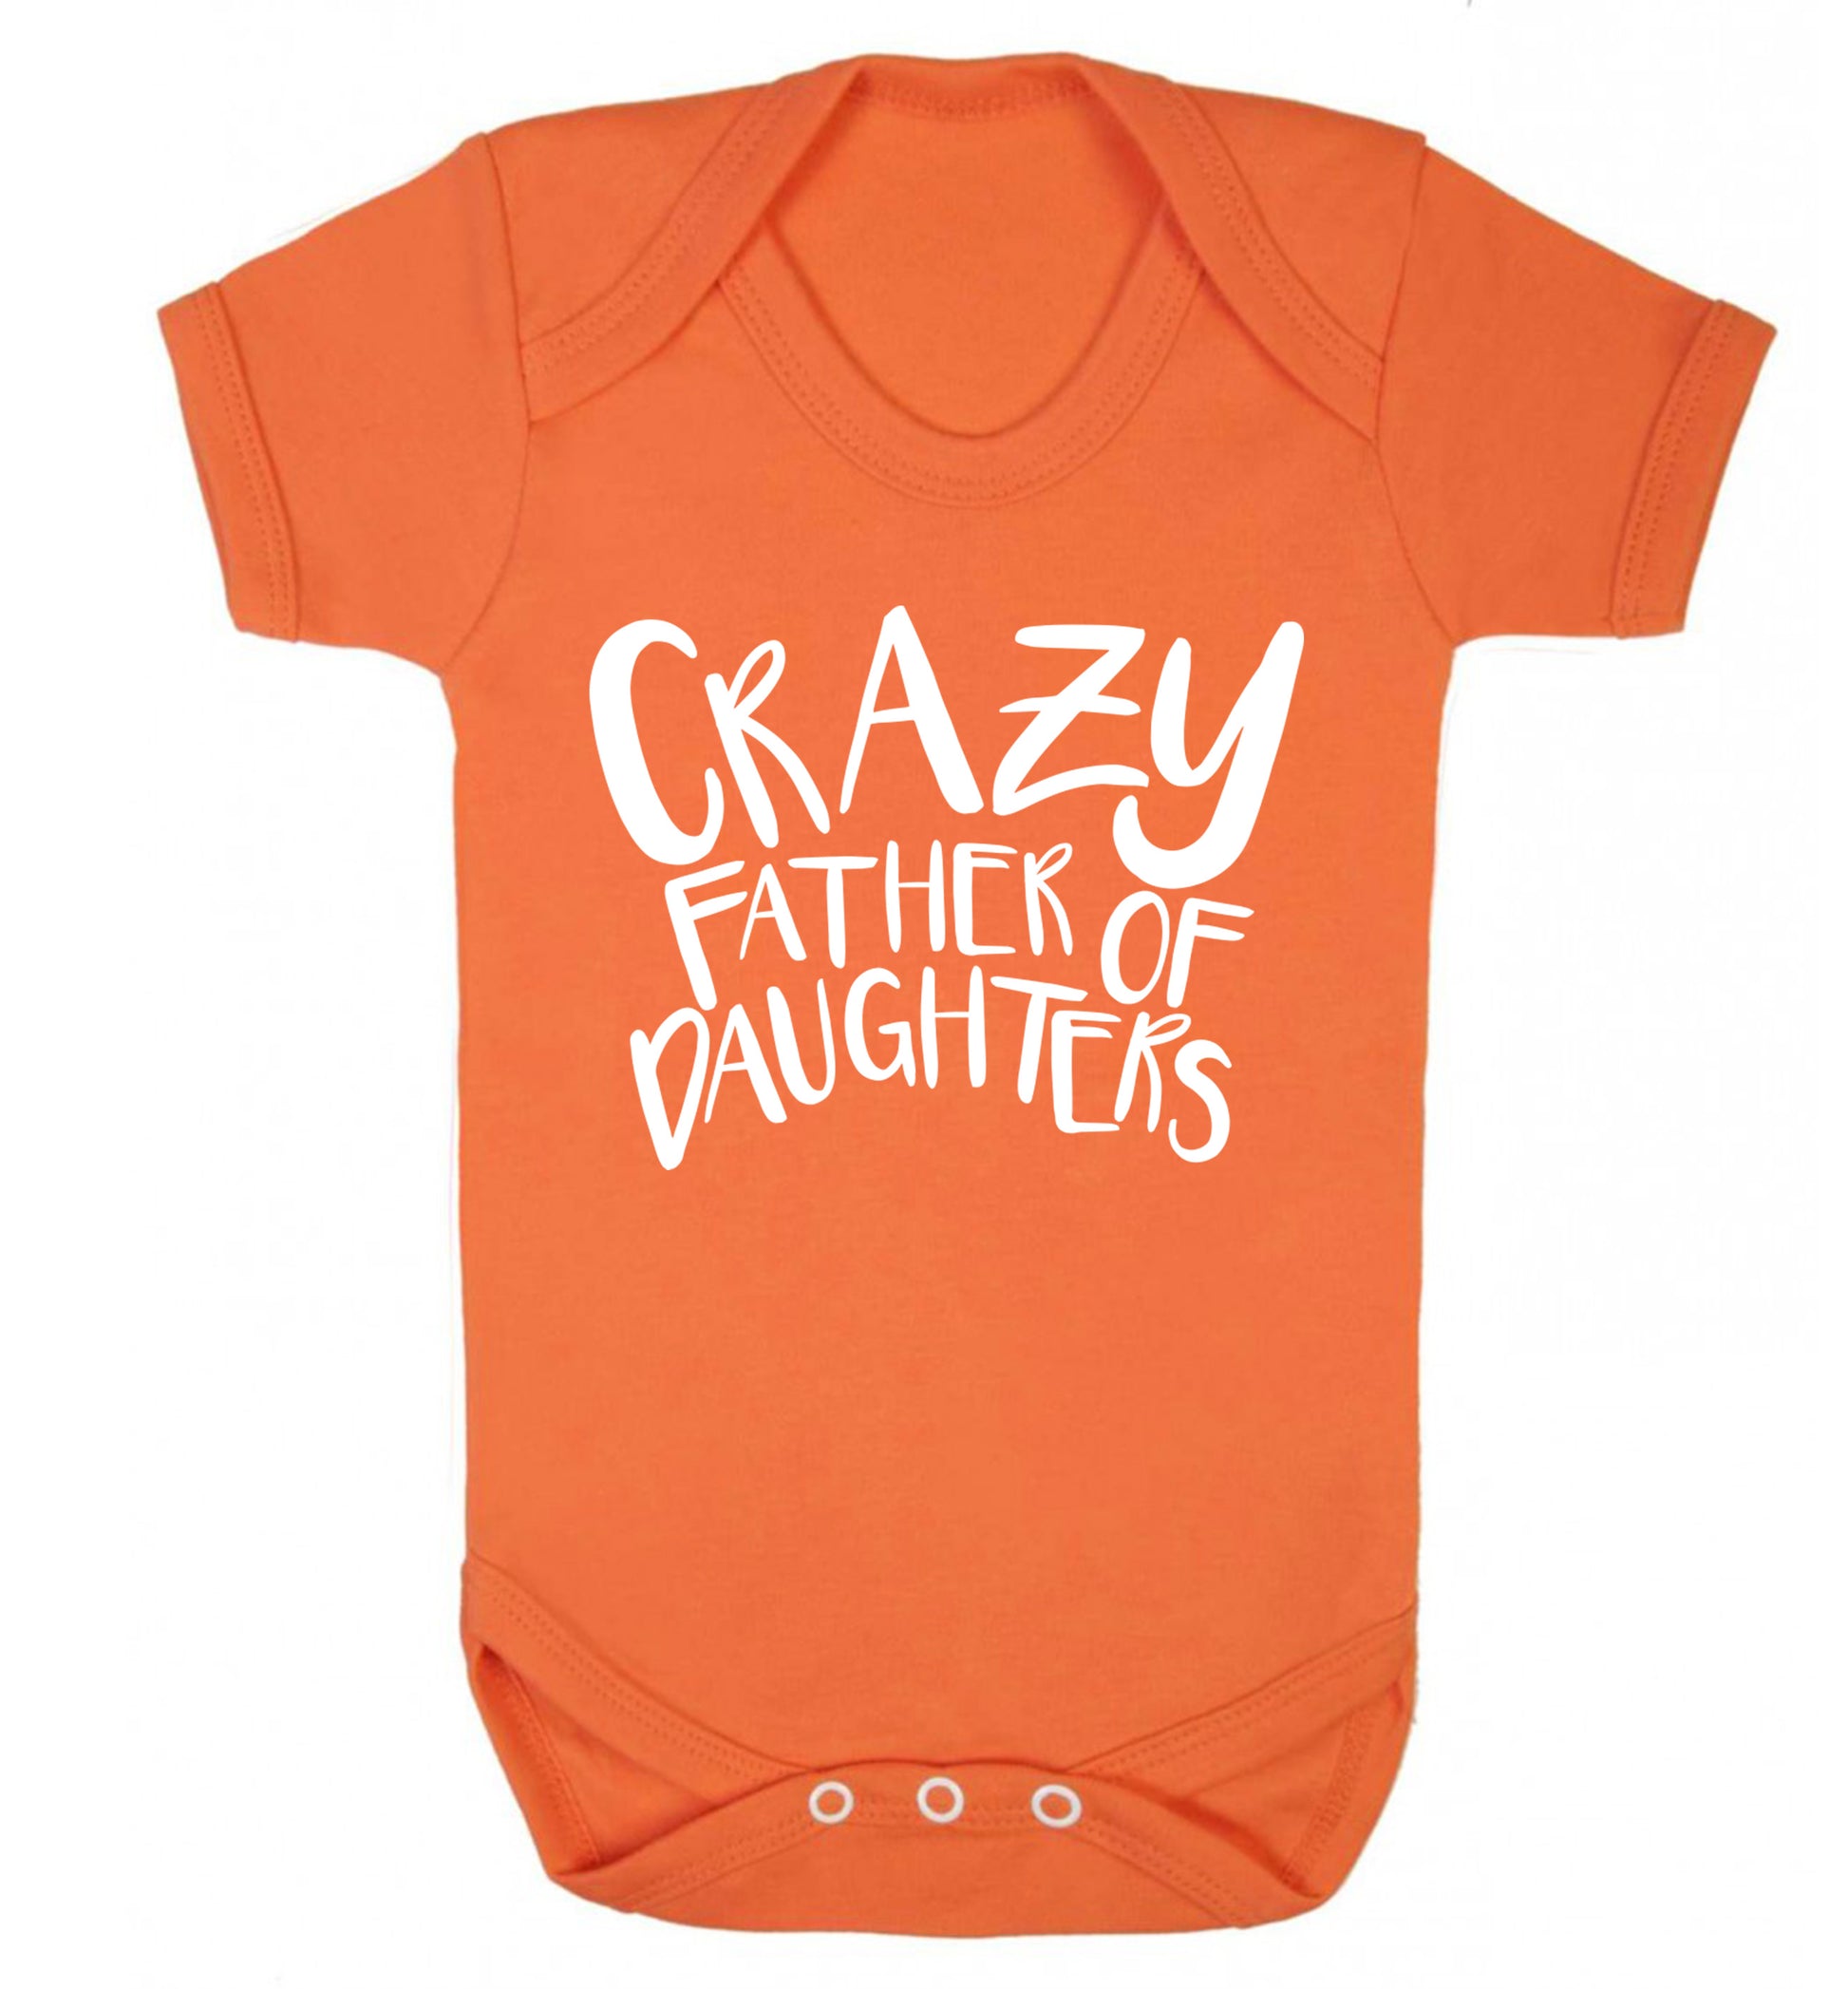 Crazy father of daughters Baby Vest orange 18-24 months